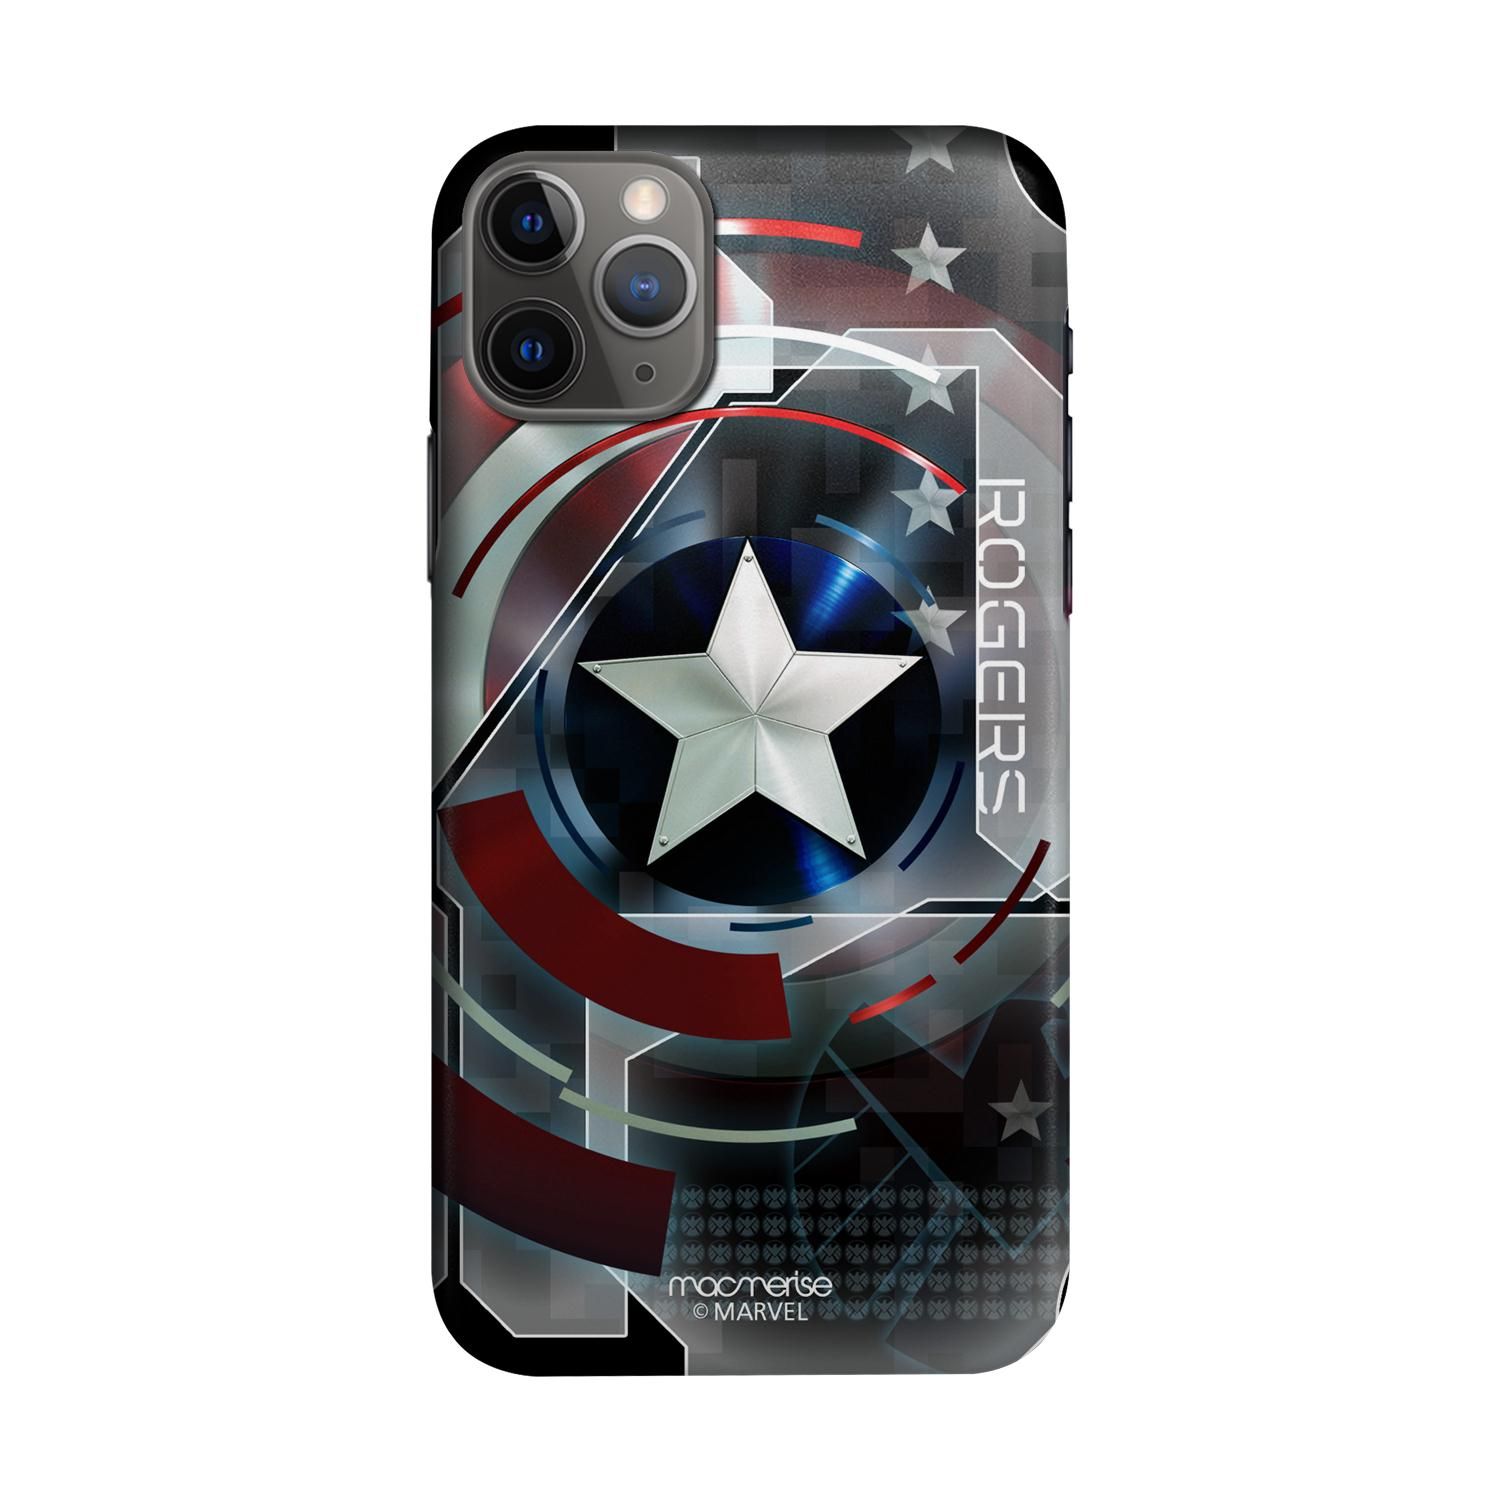 Buy Cap Am Rogers - Sleek Phone Case for iPhone 11 Pro Max Online